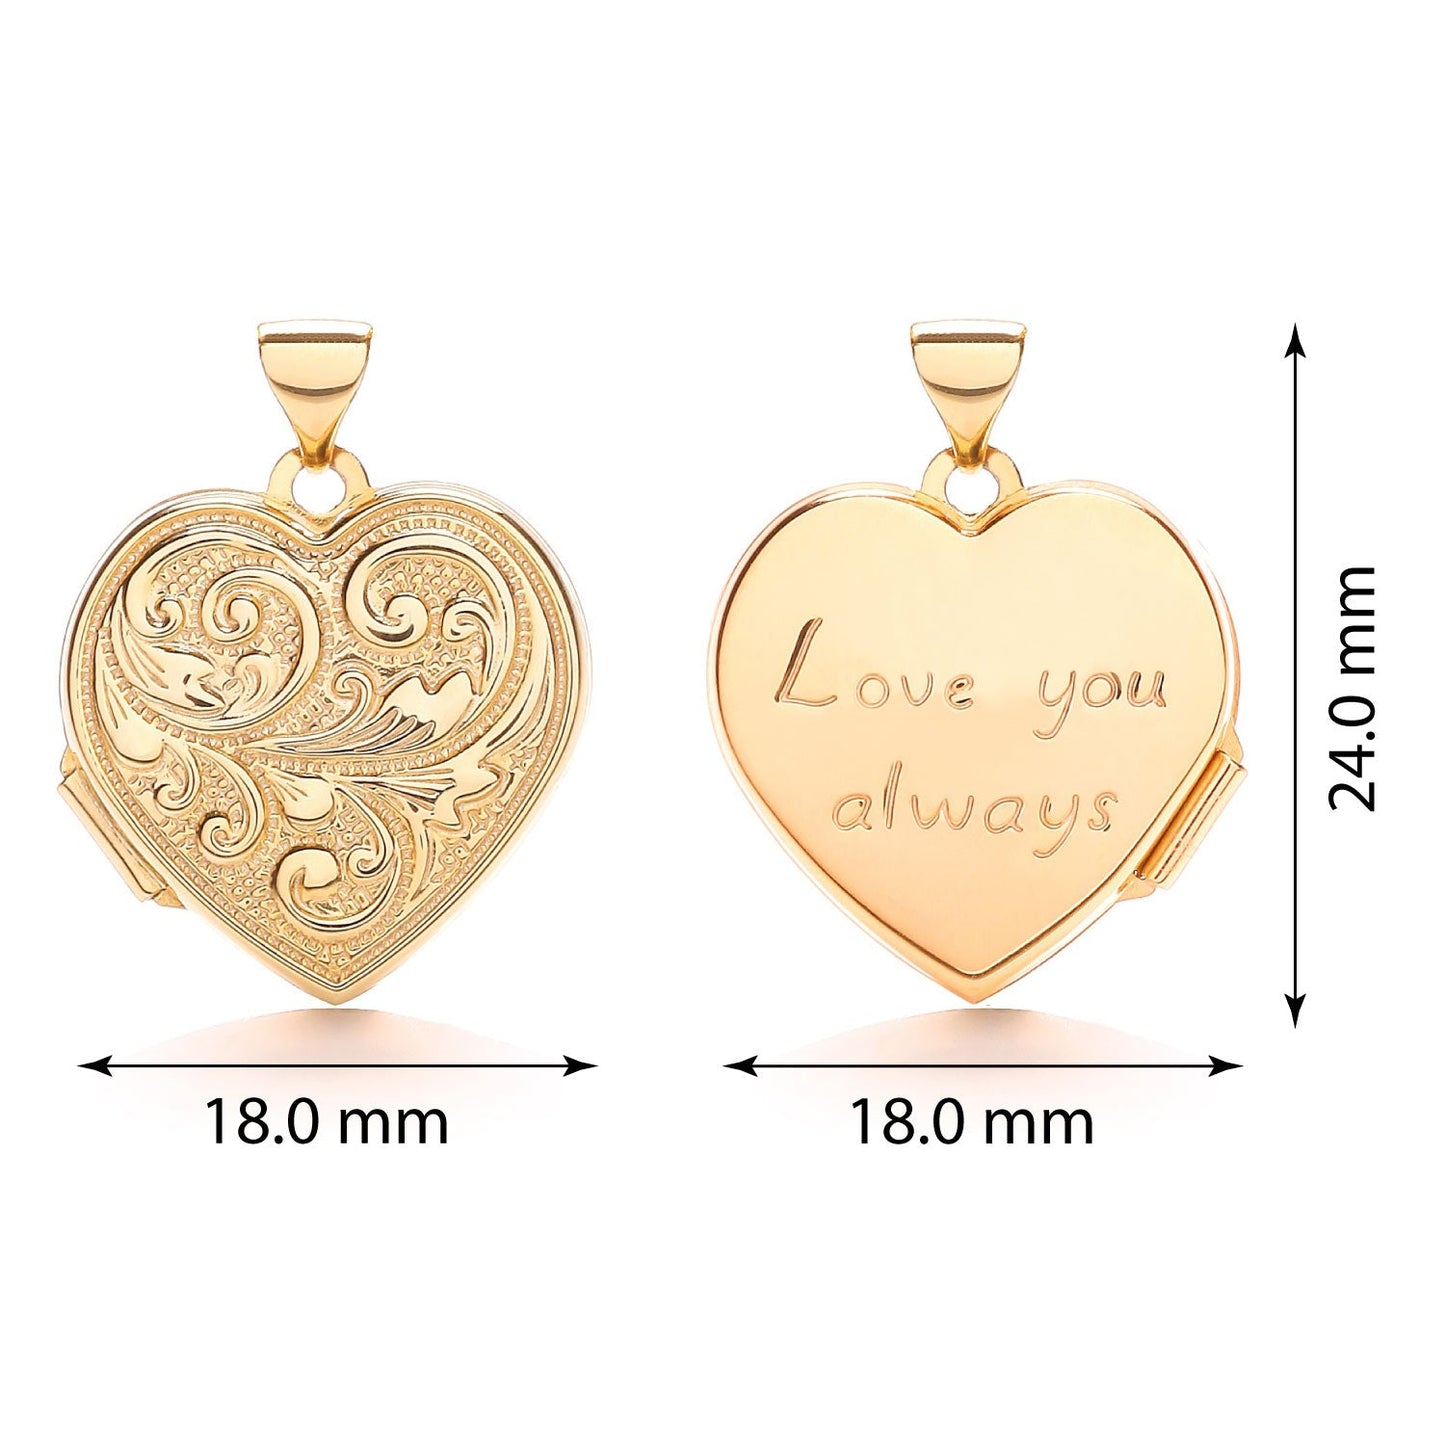 9ct Yellow Gold Heart Double Sided Locket Love You 18.0 x 24.0m - FJewellery